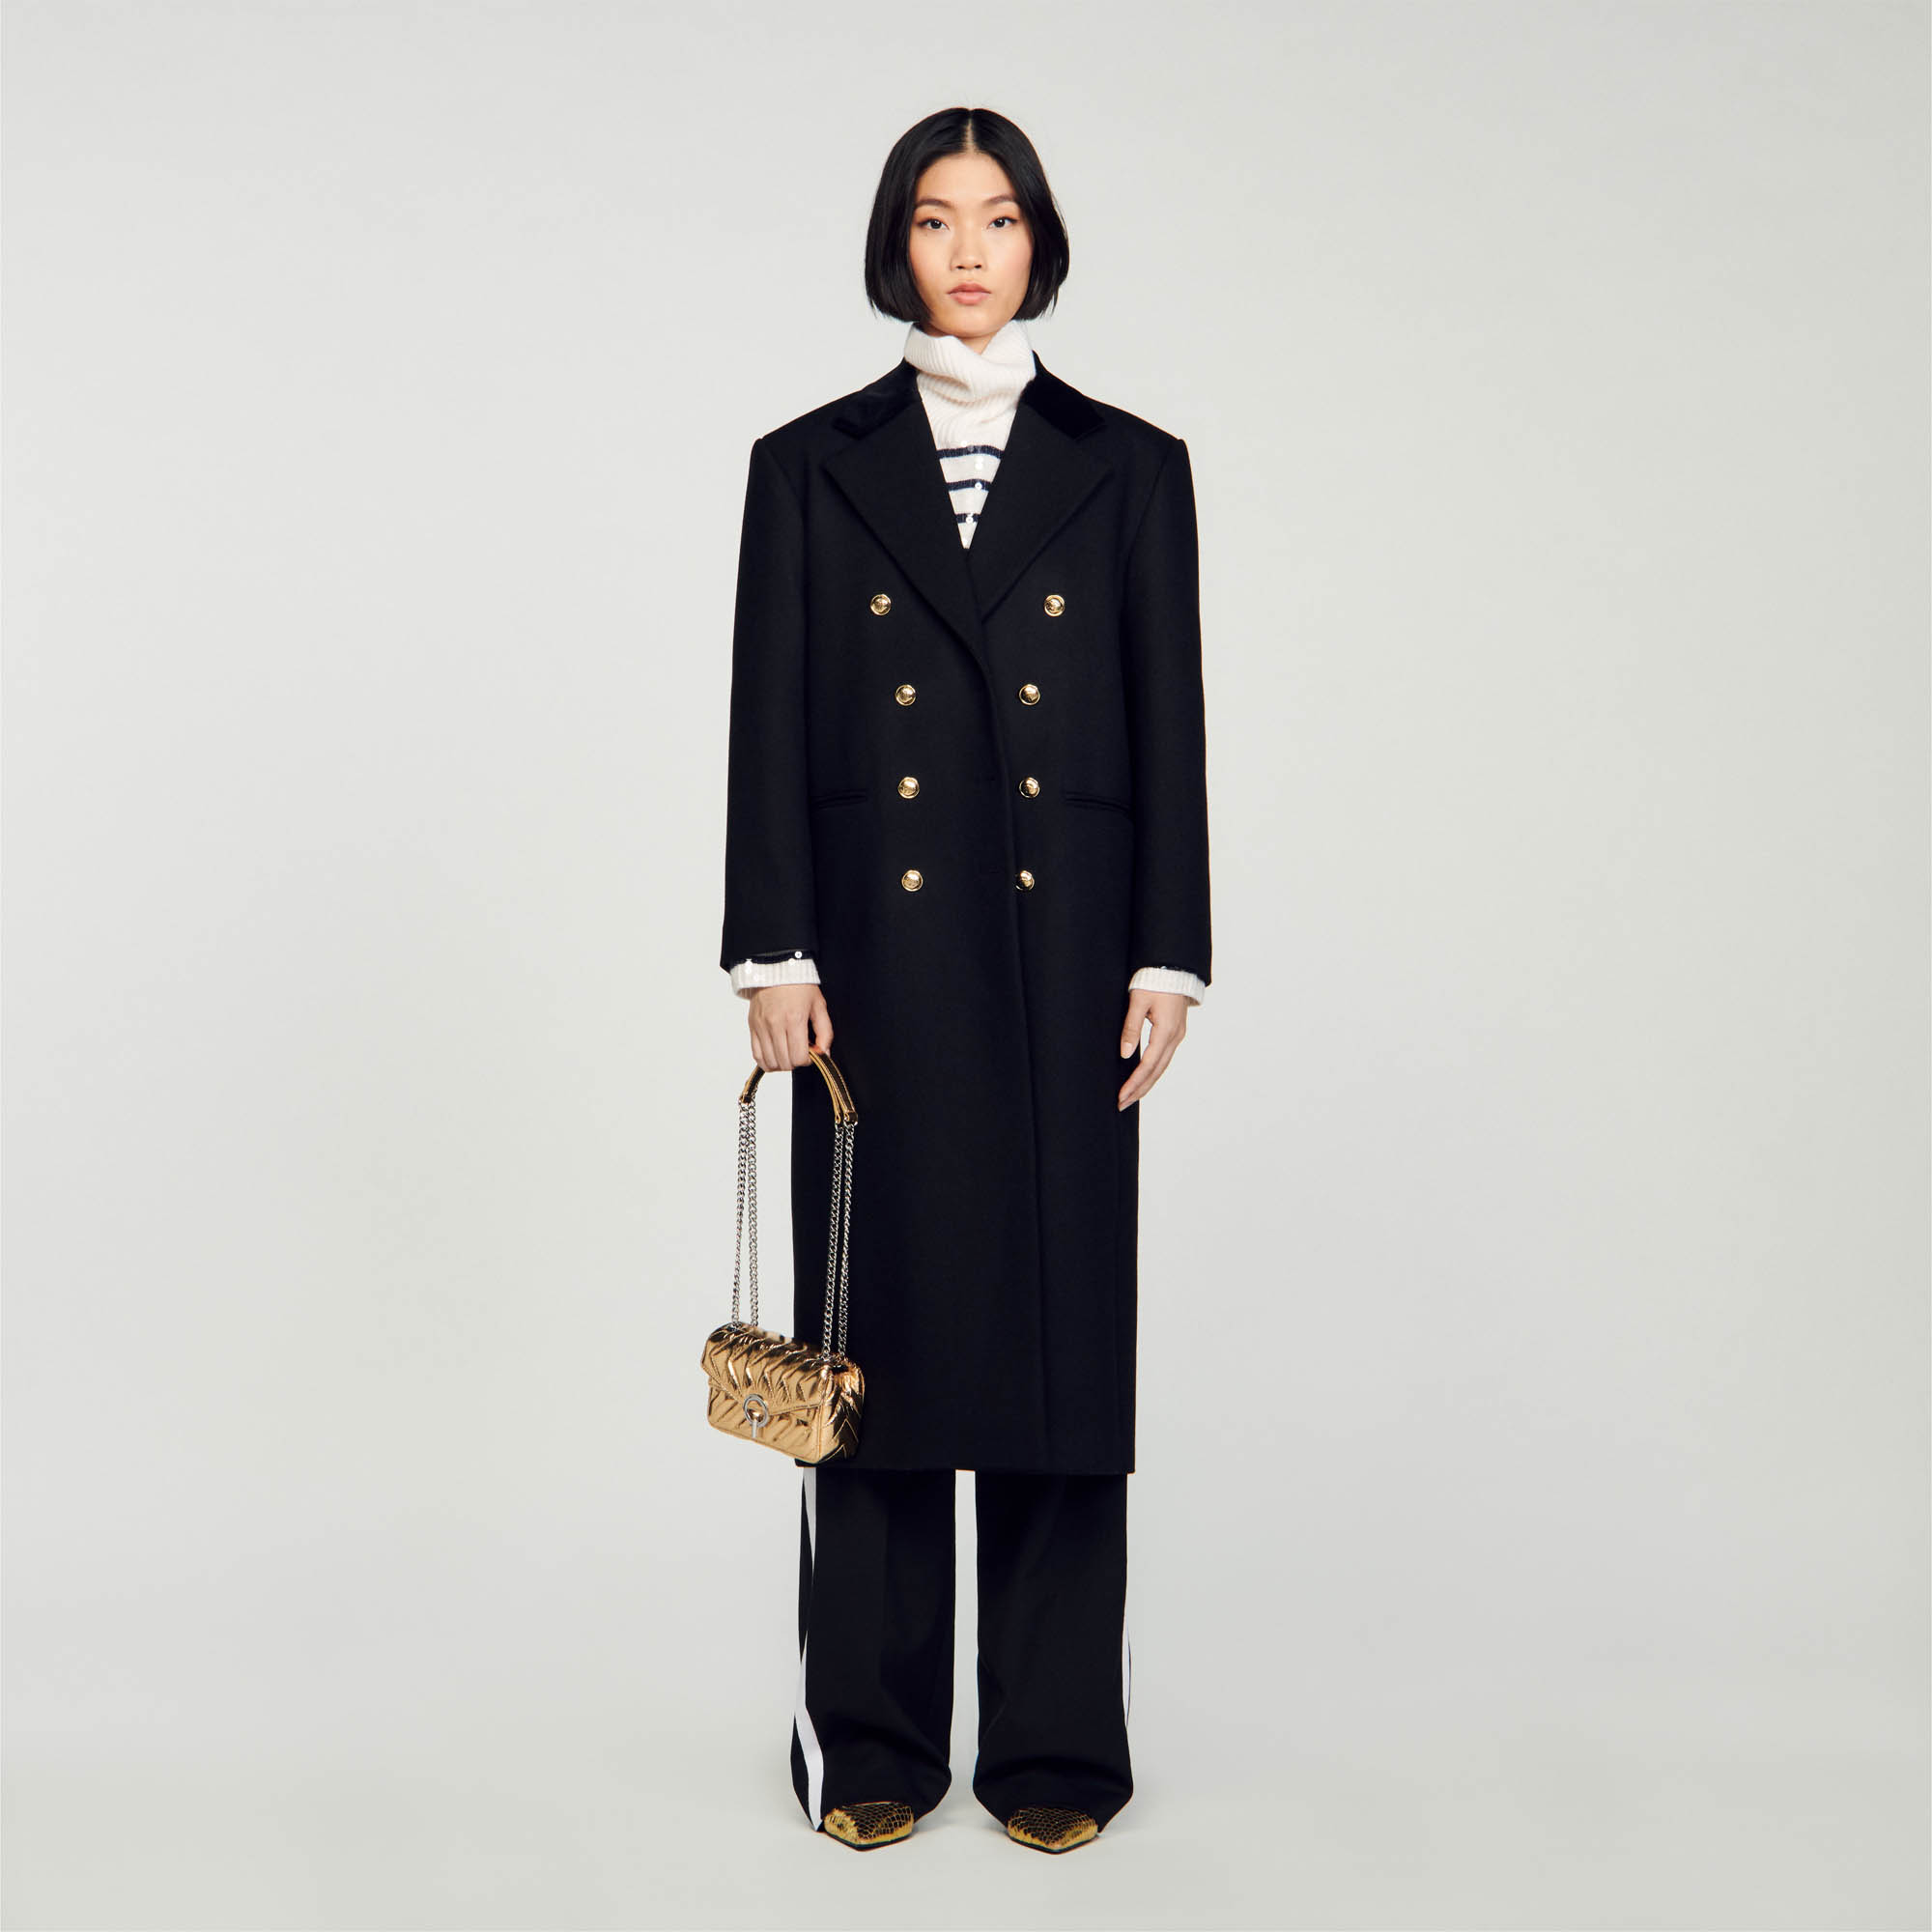 Sandro wool Long double-breasted coat with oversized lapel collar and velvet turn-up, featuring welt pockets